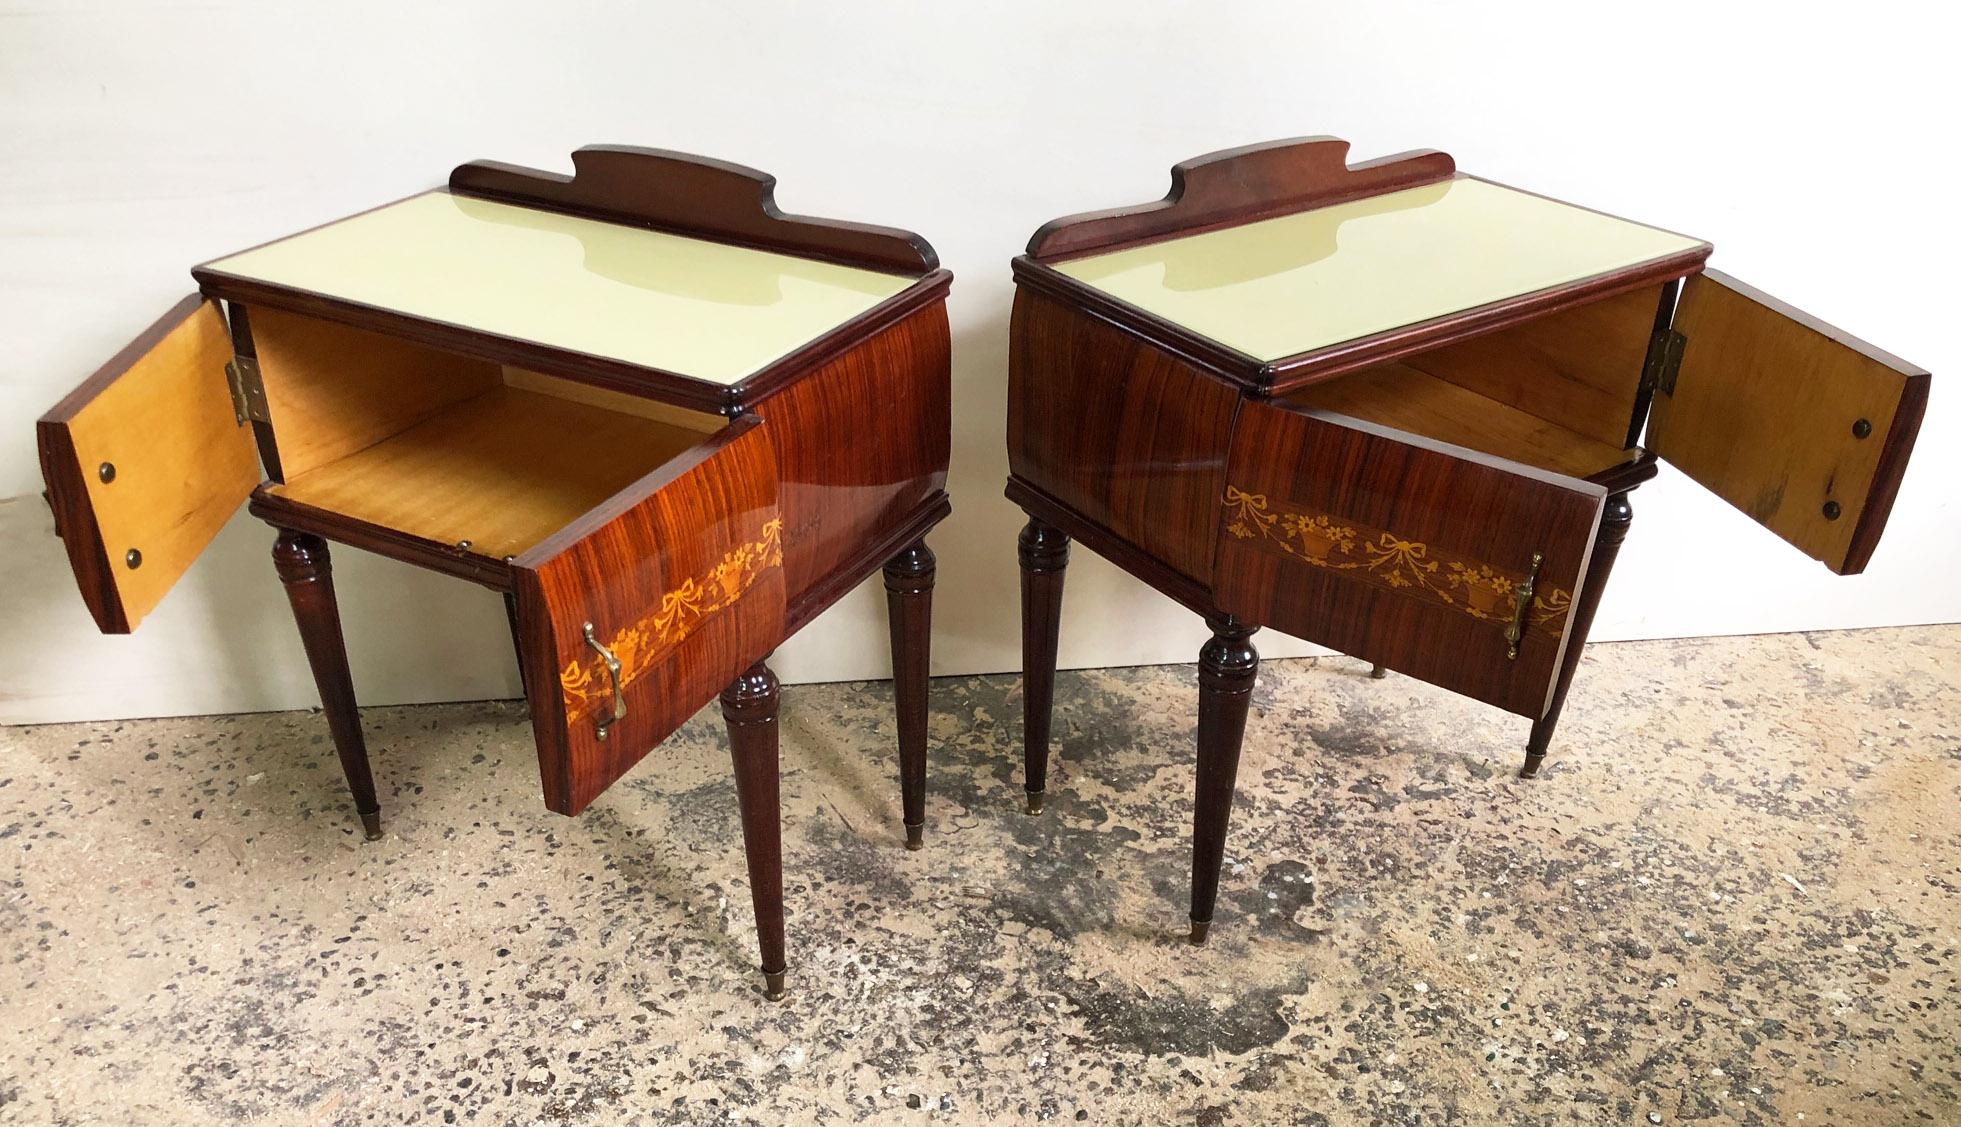 Pair of Italian night stands, in honeycomb, with floral motif inlays, original from 1960, yellow glass top.
 Comes from an old country house in the Chianti area of Tuscany.
The paint is original in patina, honey amber color. 
As shown in the